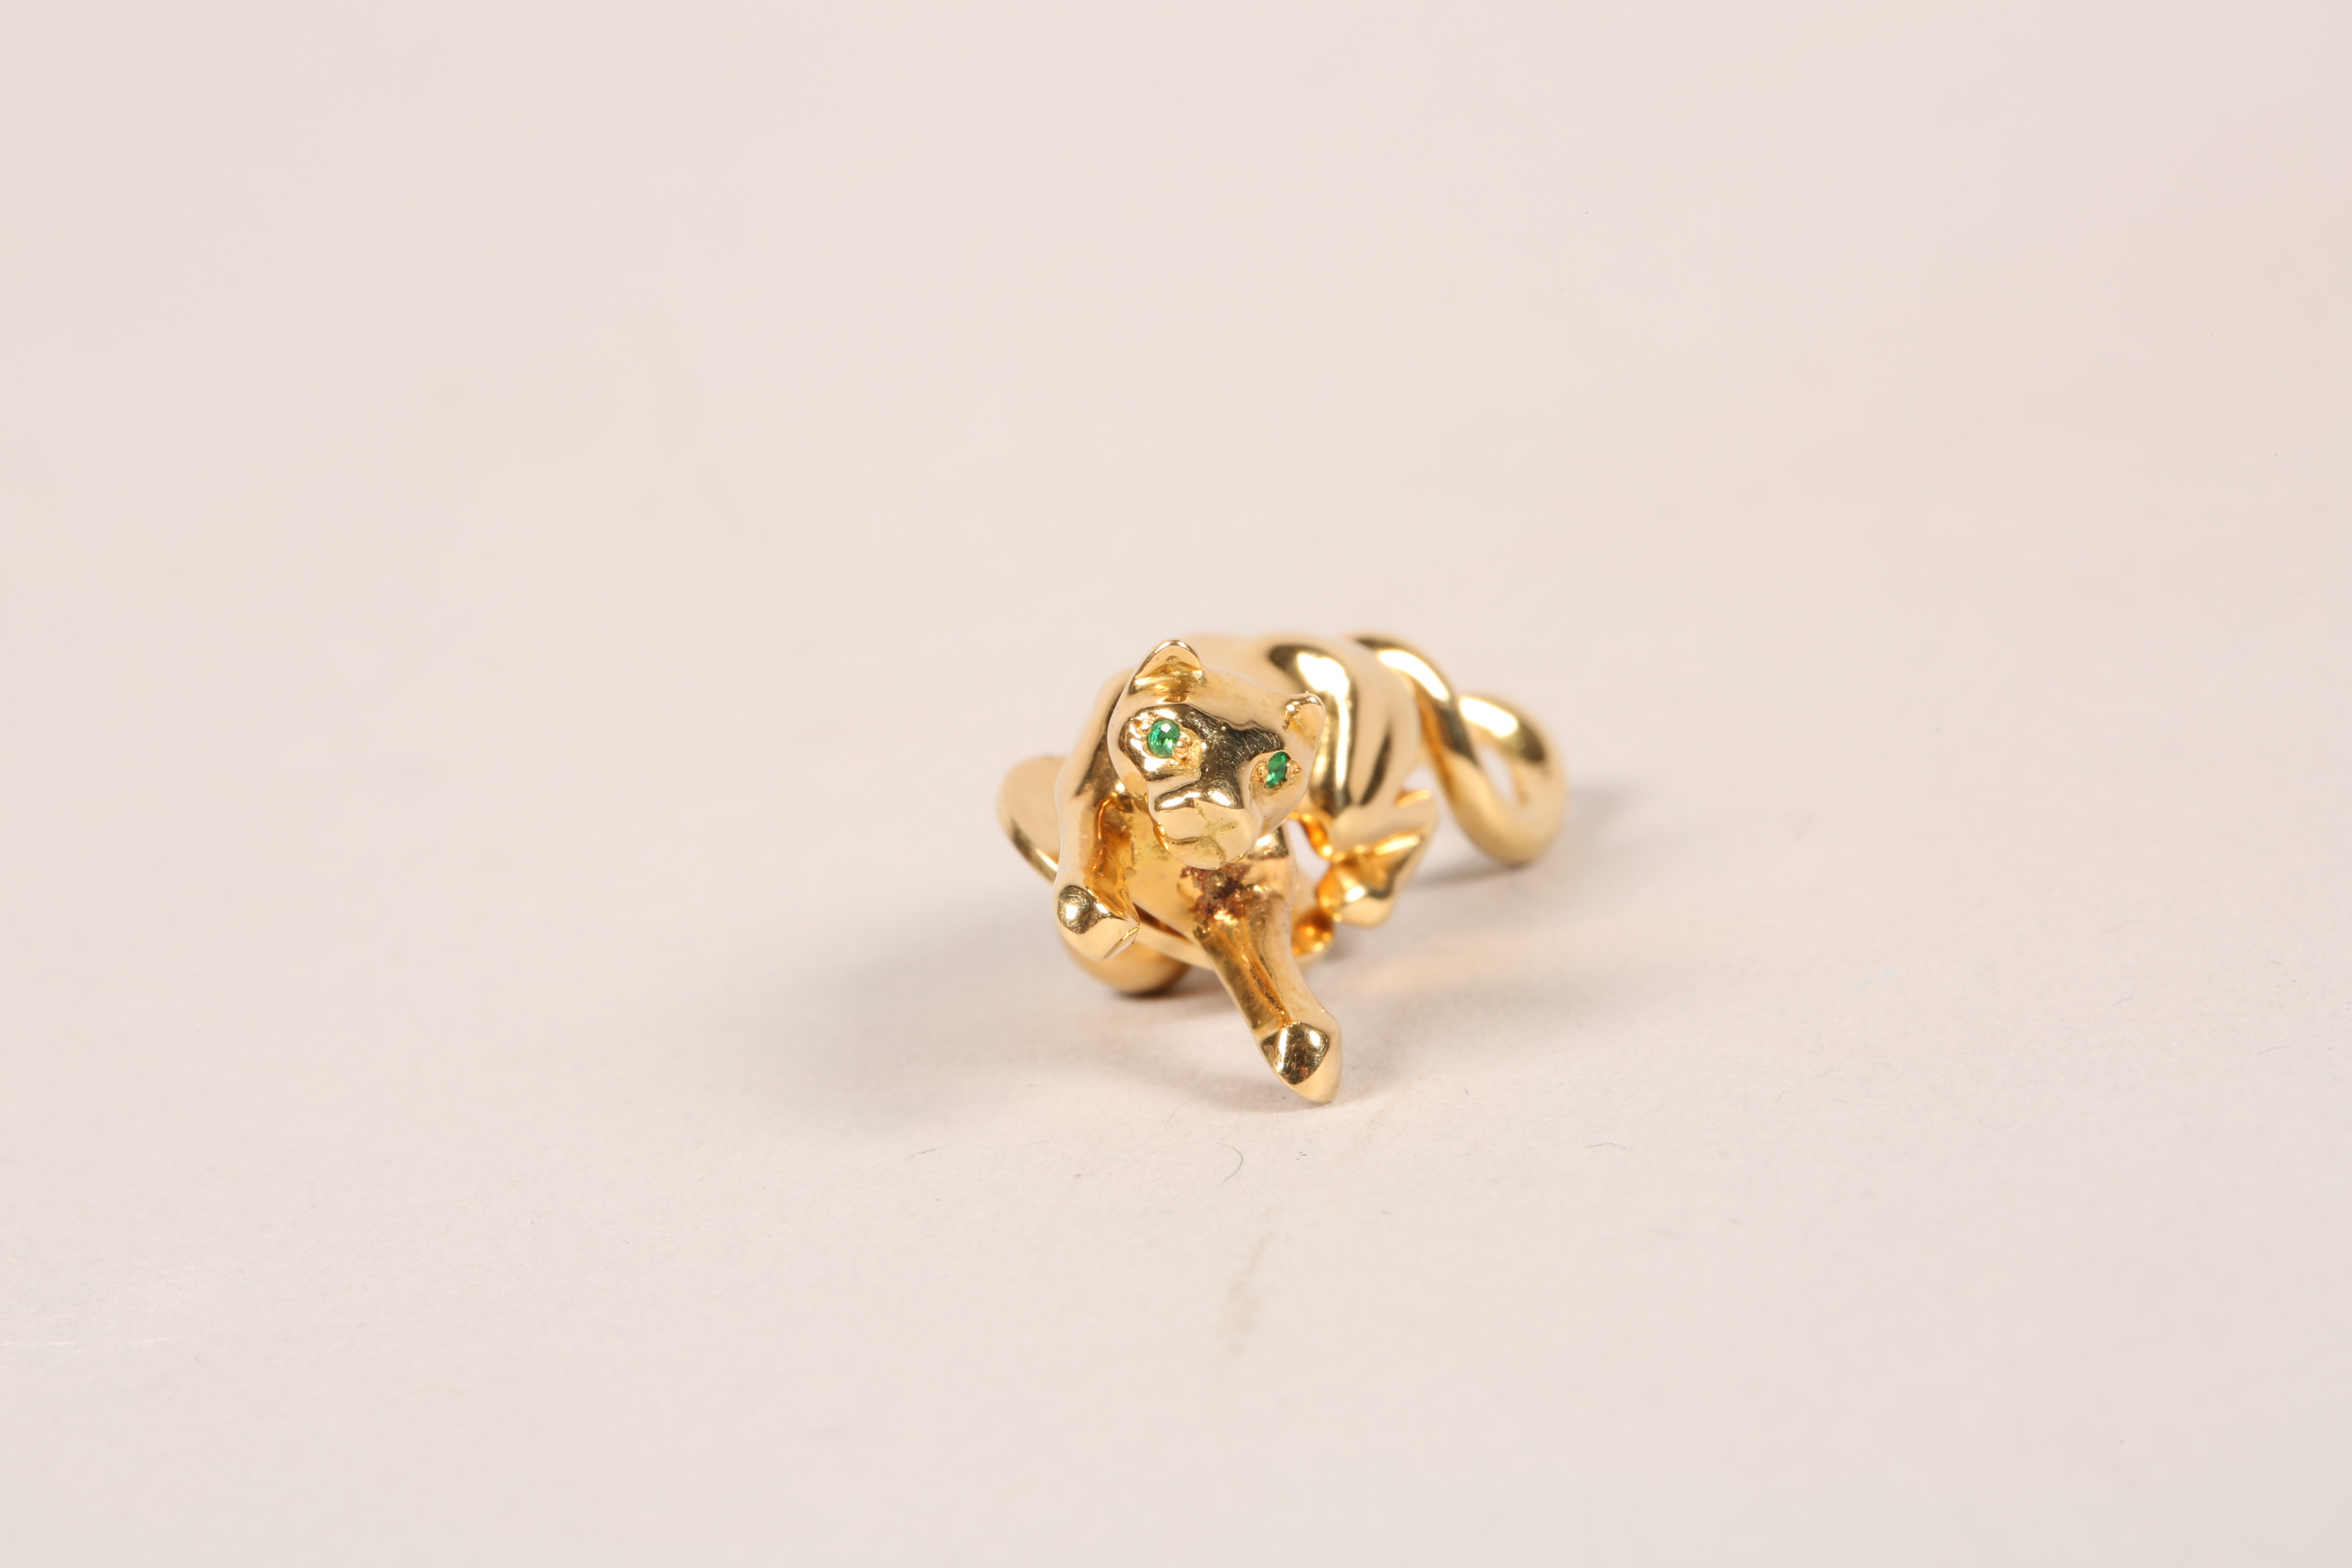 Cartier 18 carat gold panther tie pin with emerald eyes signed Cartier No607004 stamped 750 with - Image 4 of 5